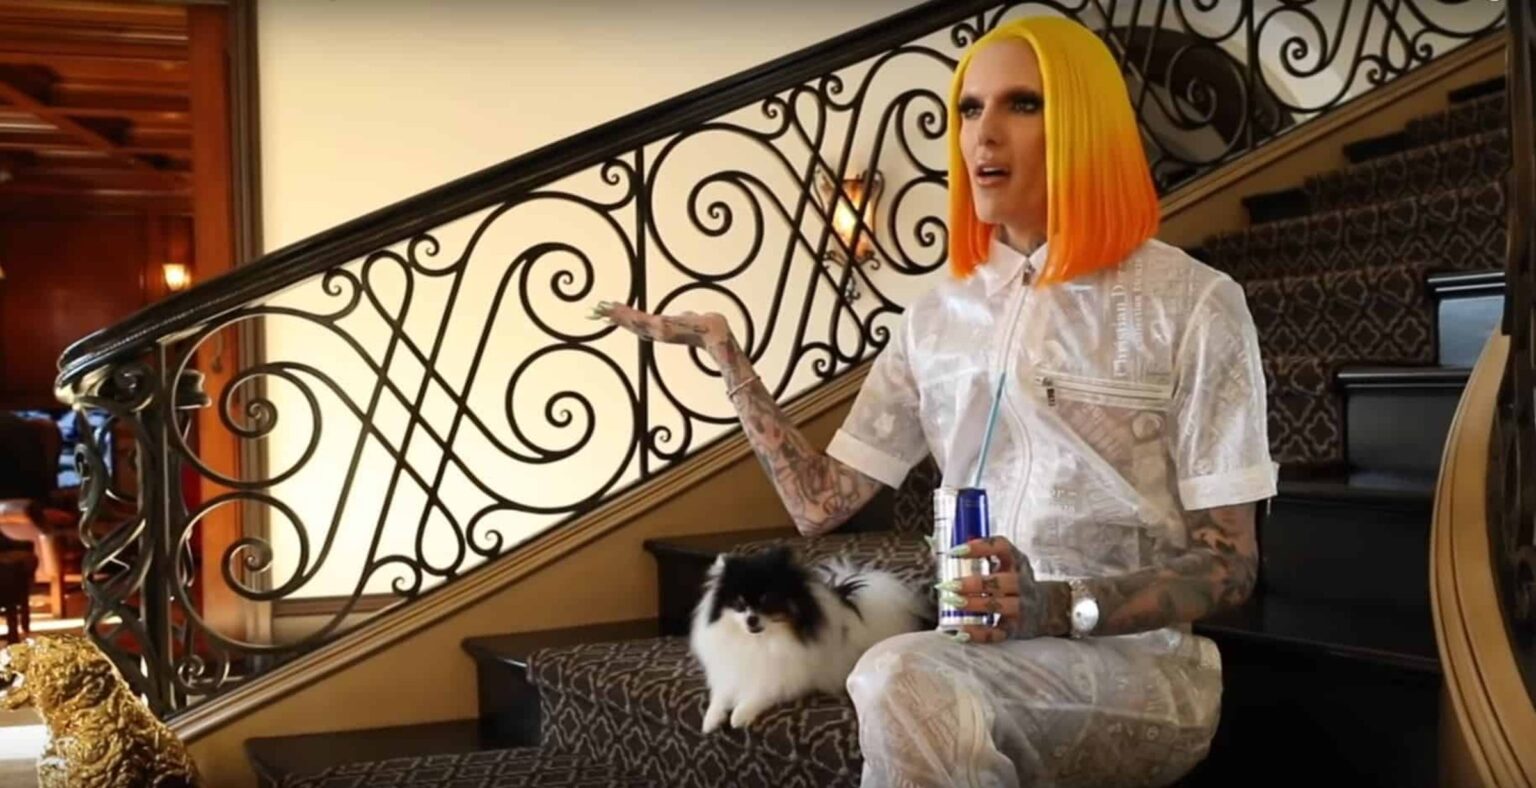 Does Jeffrey Star deserve his net worth? Take a look inside Jeffree Star's new $14 million house and learn why it's hard to be thrilled.